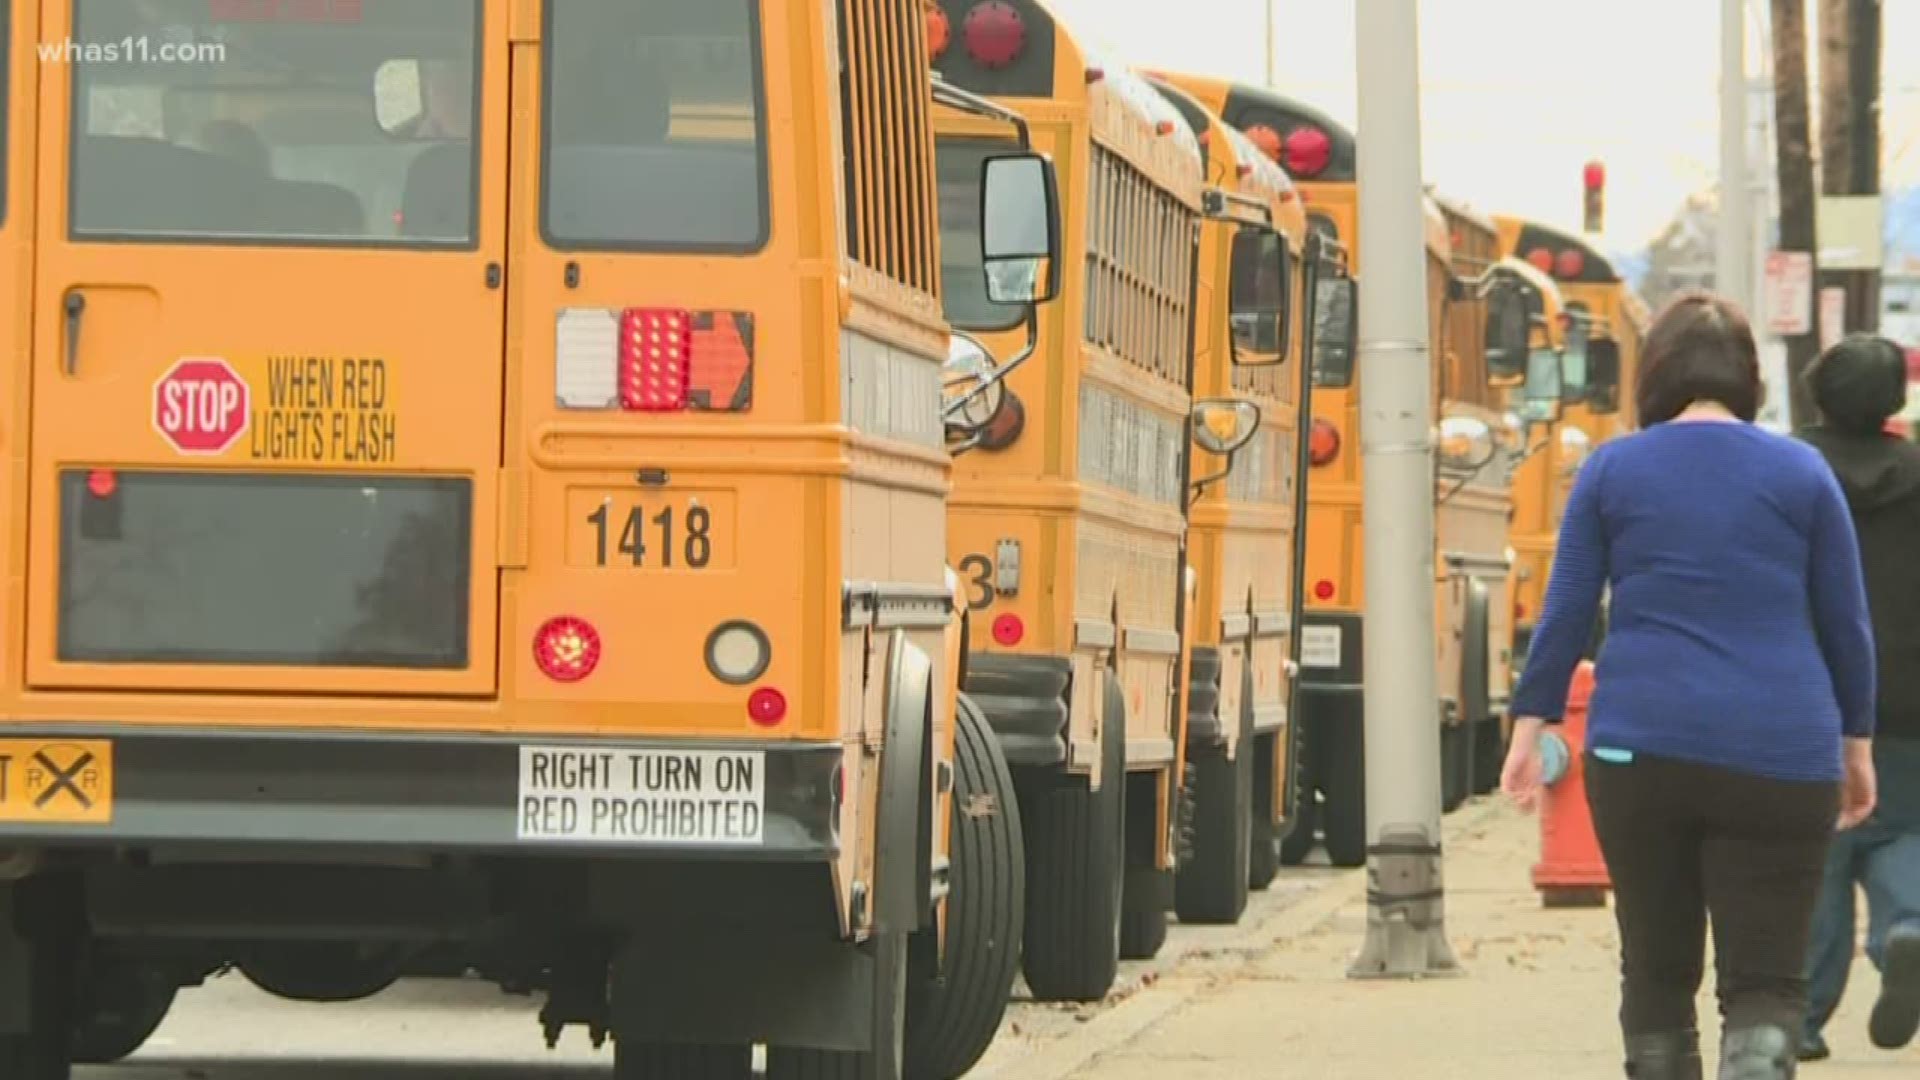 JCPS says more than 6,000 students do not have a choice of attending a school that is close to home.